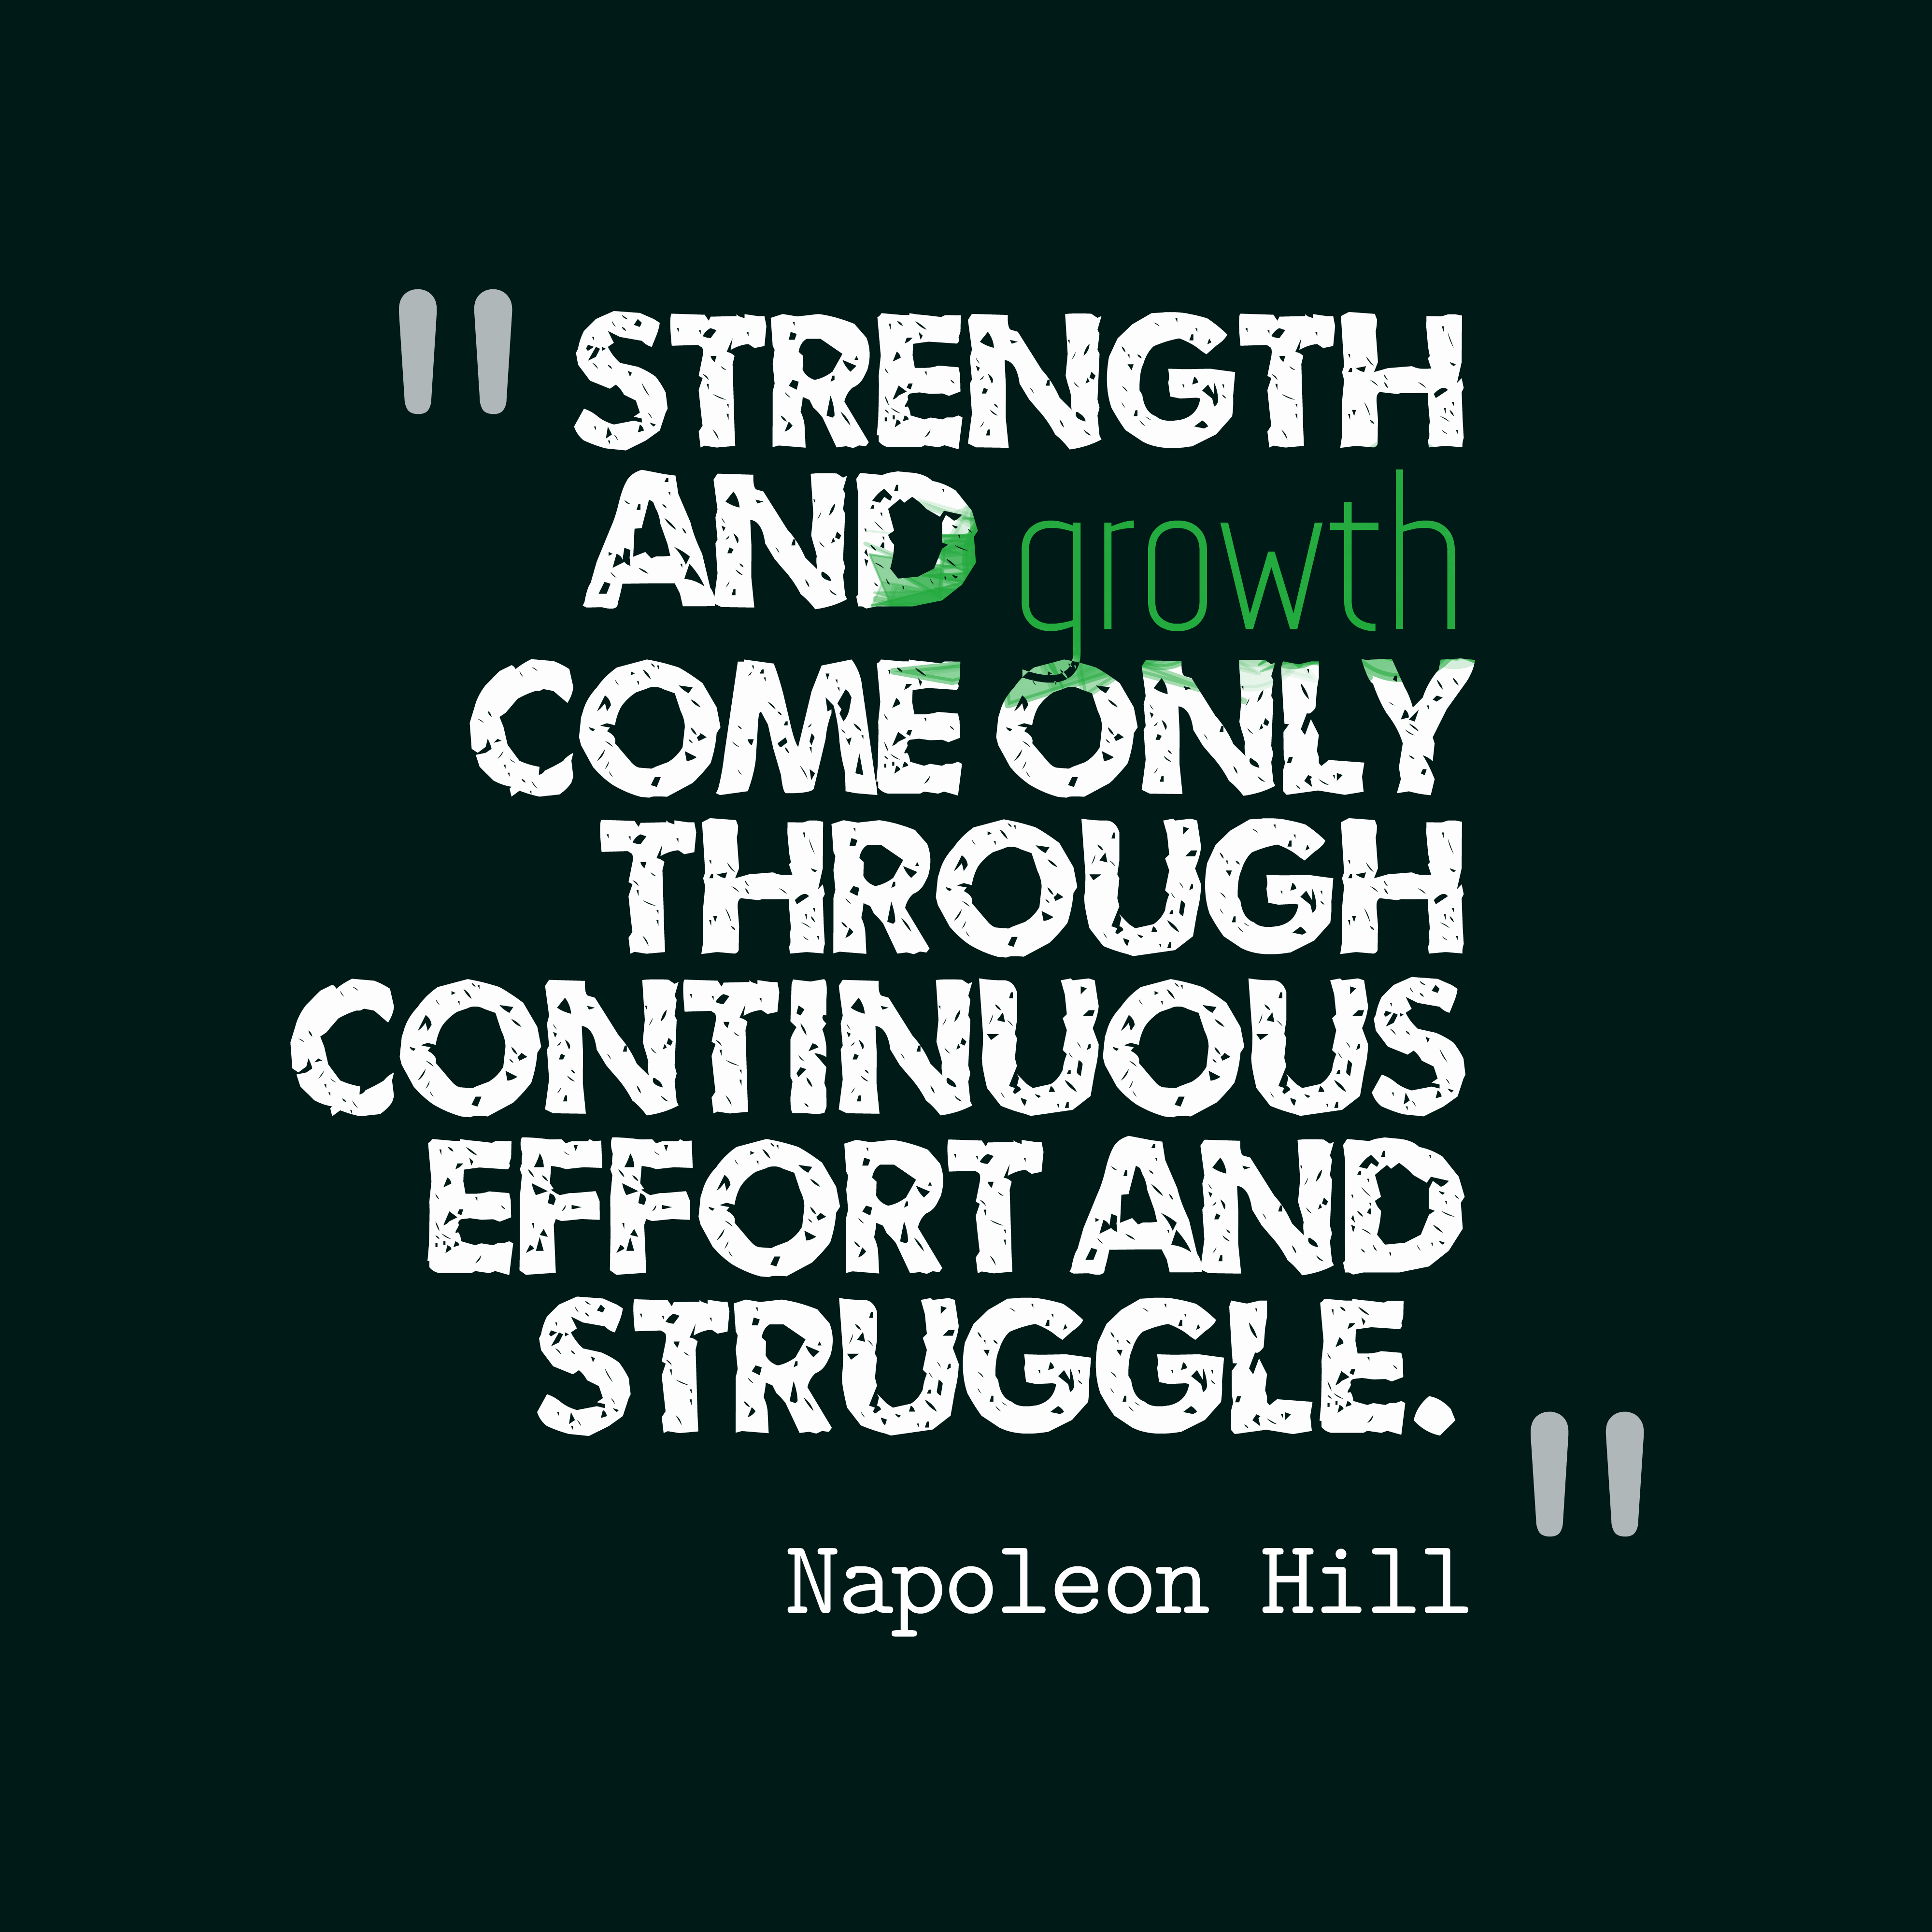 Strength and growth come only through continuous effort and struggle Napoleon Hill